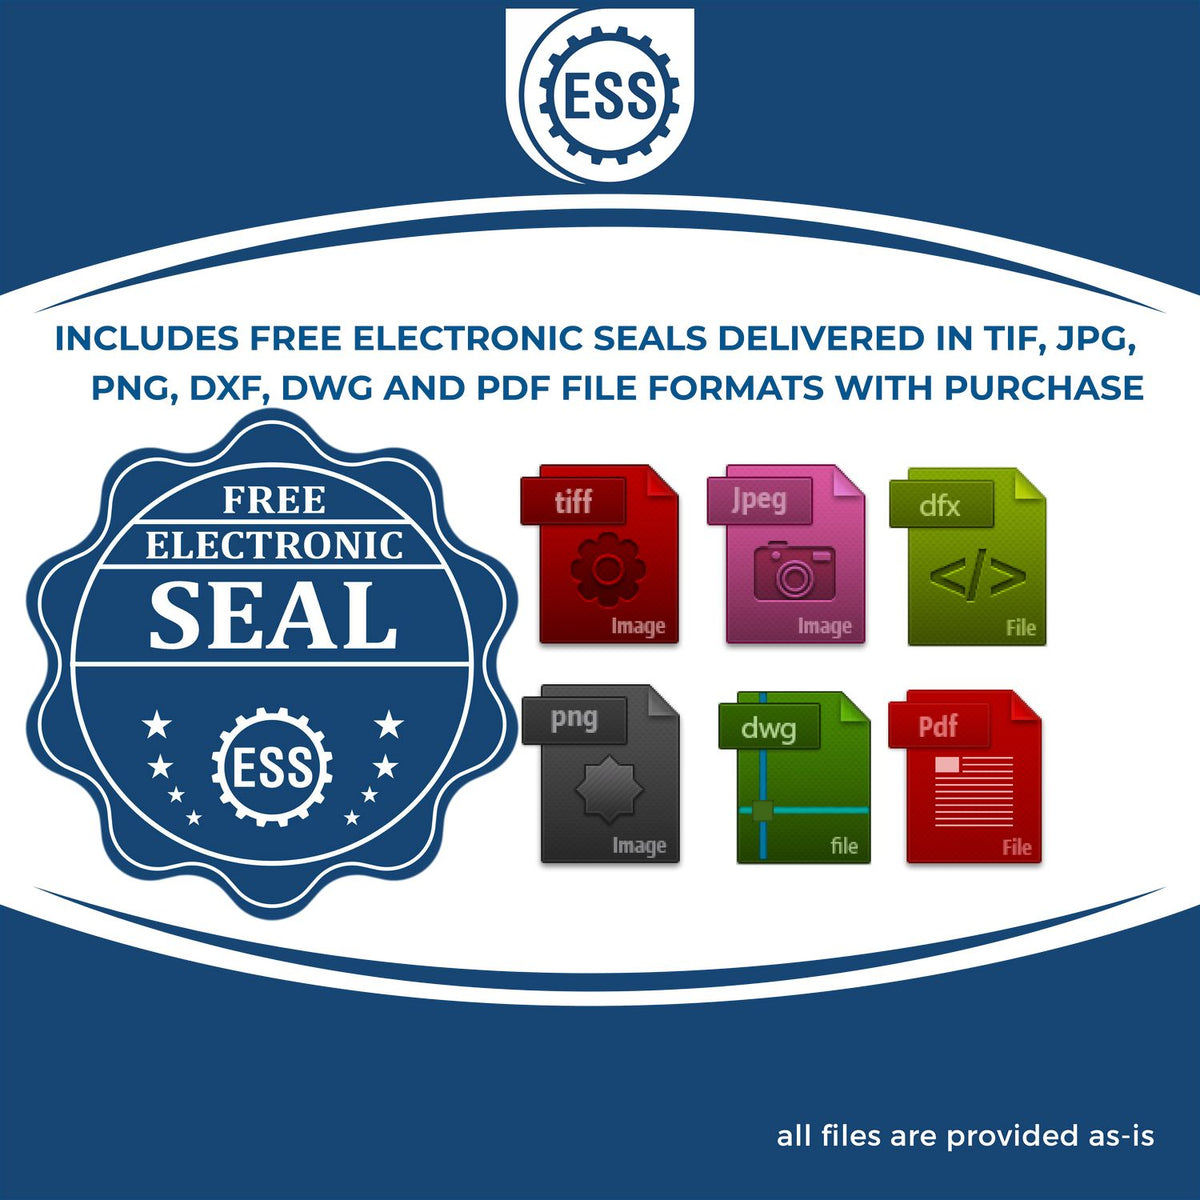 An infographic for the free electronic seal for the Self-Inking Colorado Geologist Stamp illustrating the different file type icons such as DXF, DWG, TIF, JPG and PNG.